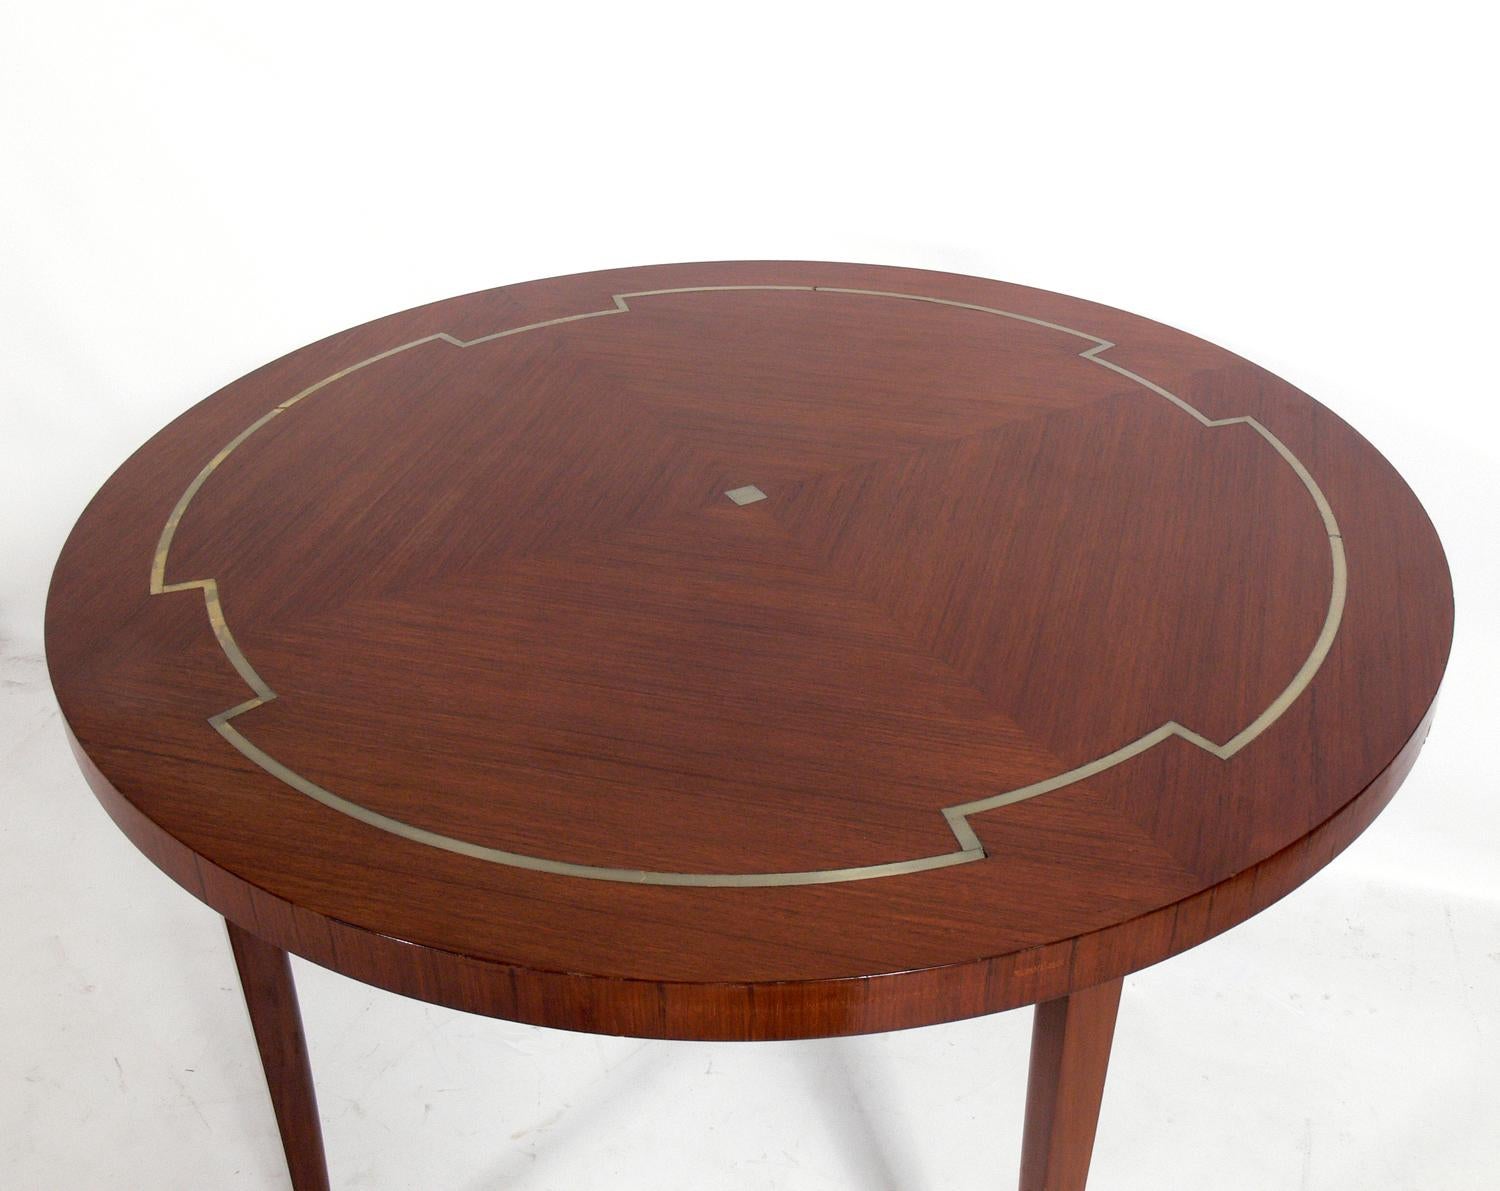 Elegant dining table, designed by Tommi Parzinger for Parzinger originals, circa 1960s. This table is currently being refinished and can be completed in your choice of finish color. It is a versatile size and can be used as a small dining table for